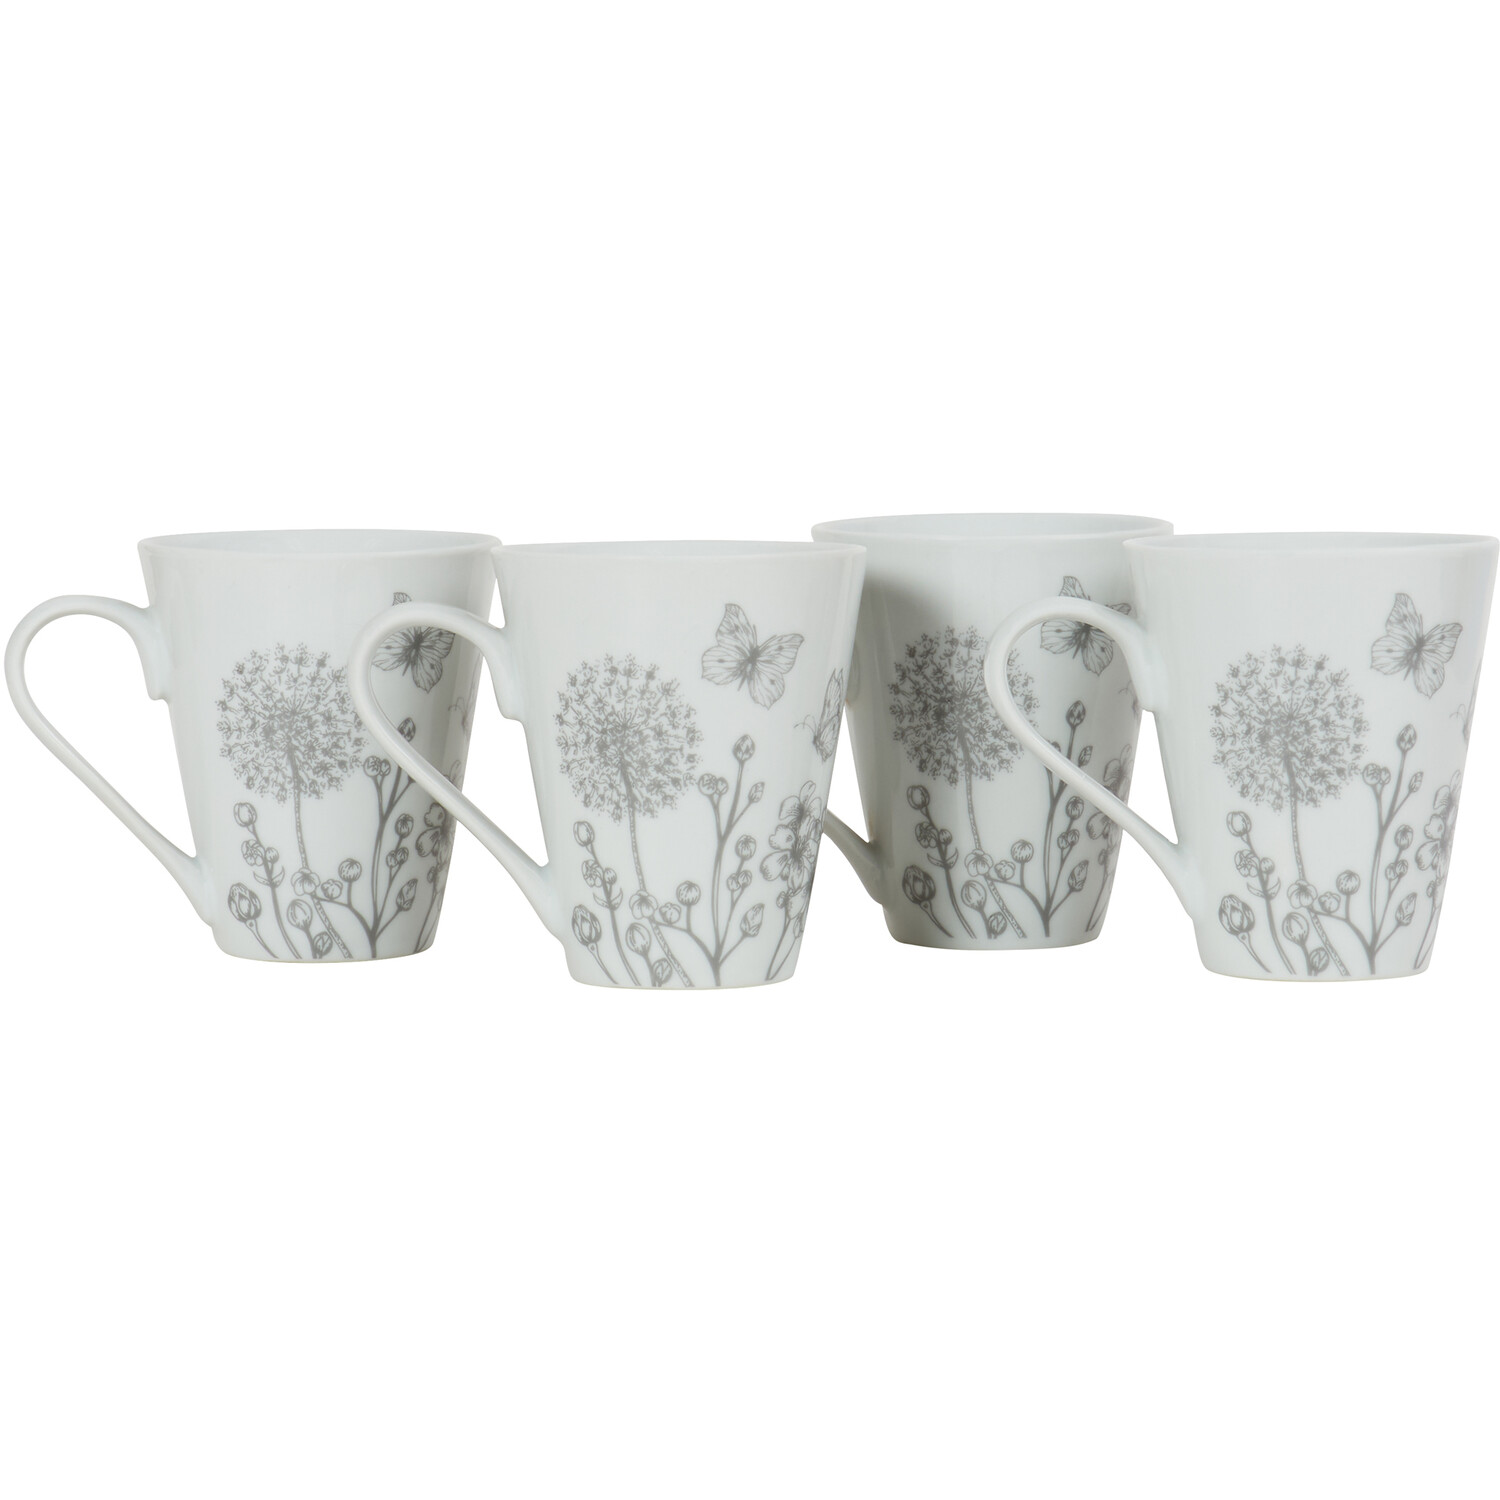 Pack of 4 Butterflies Mugs - White Image 4